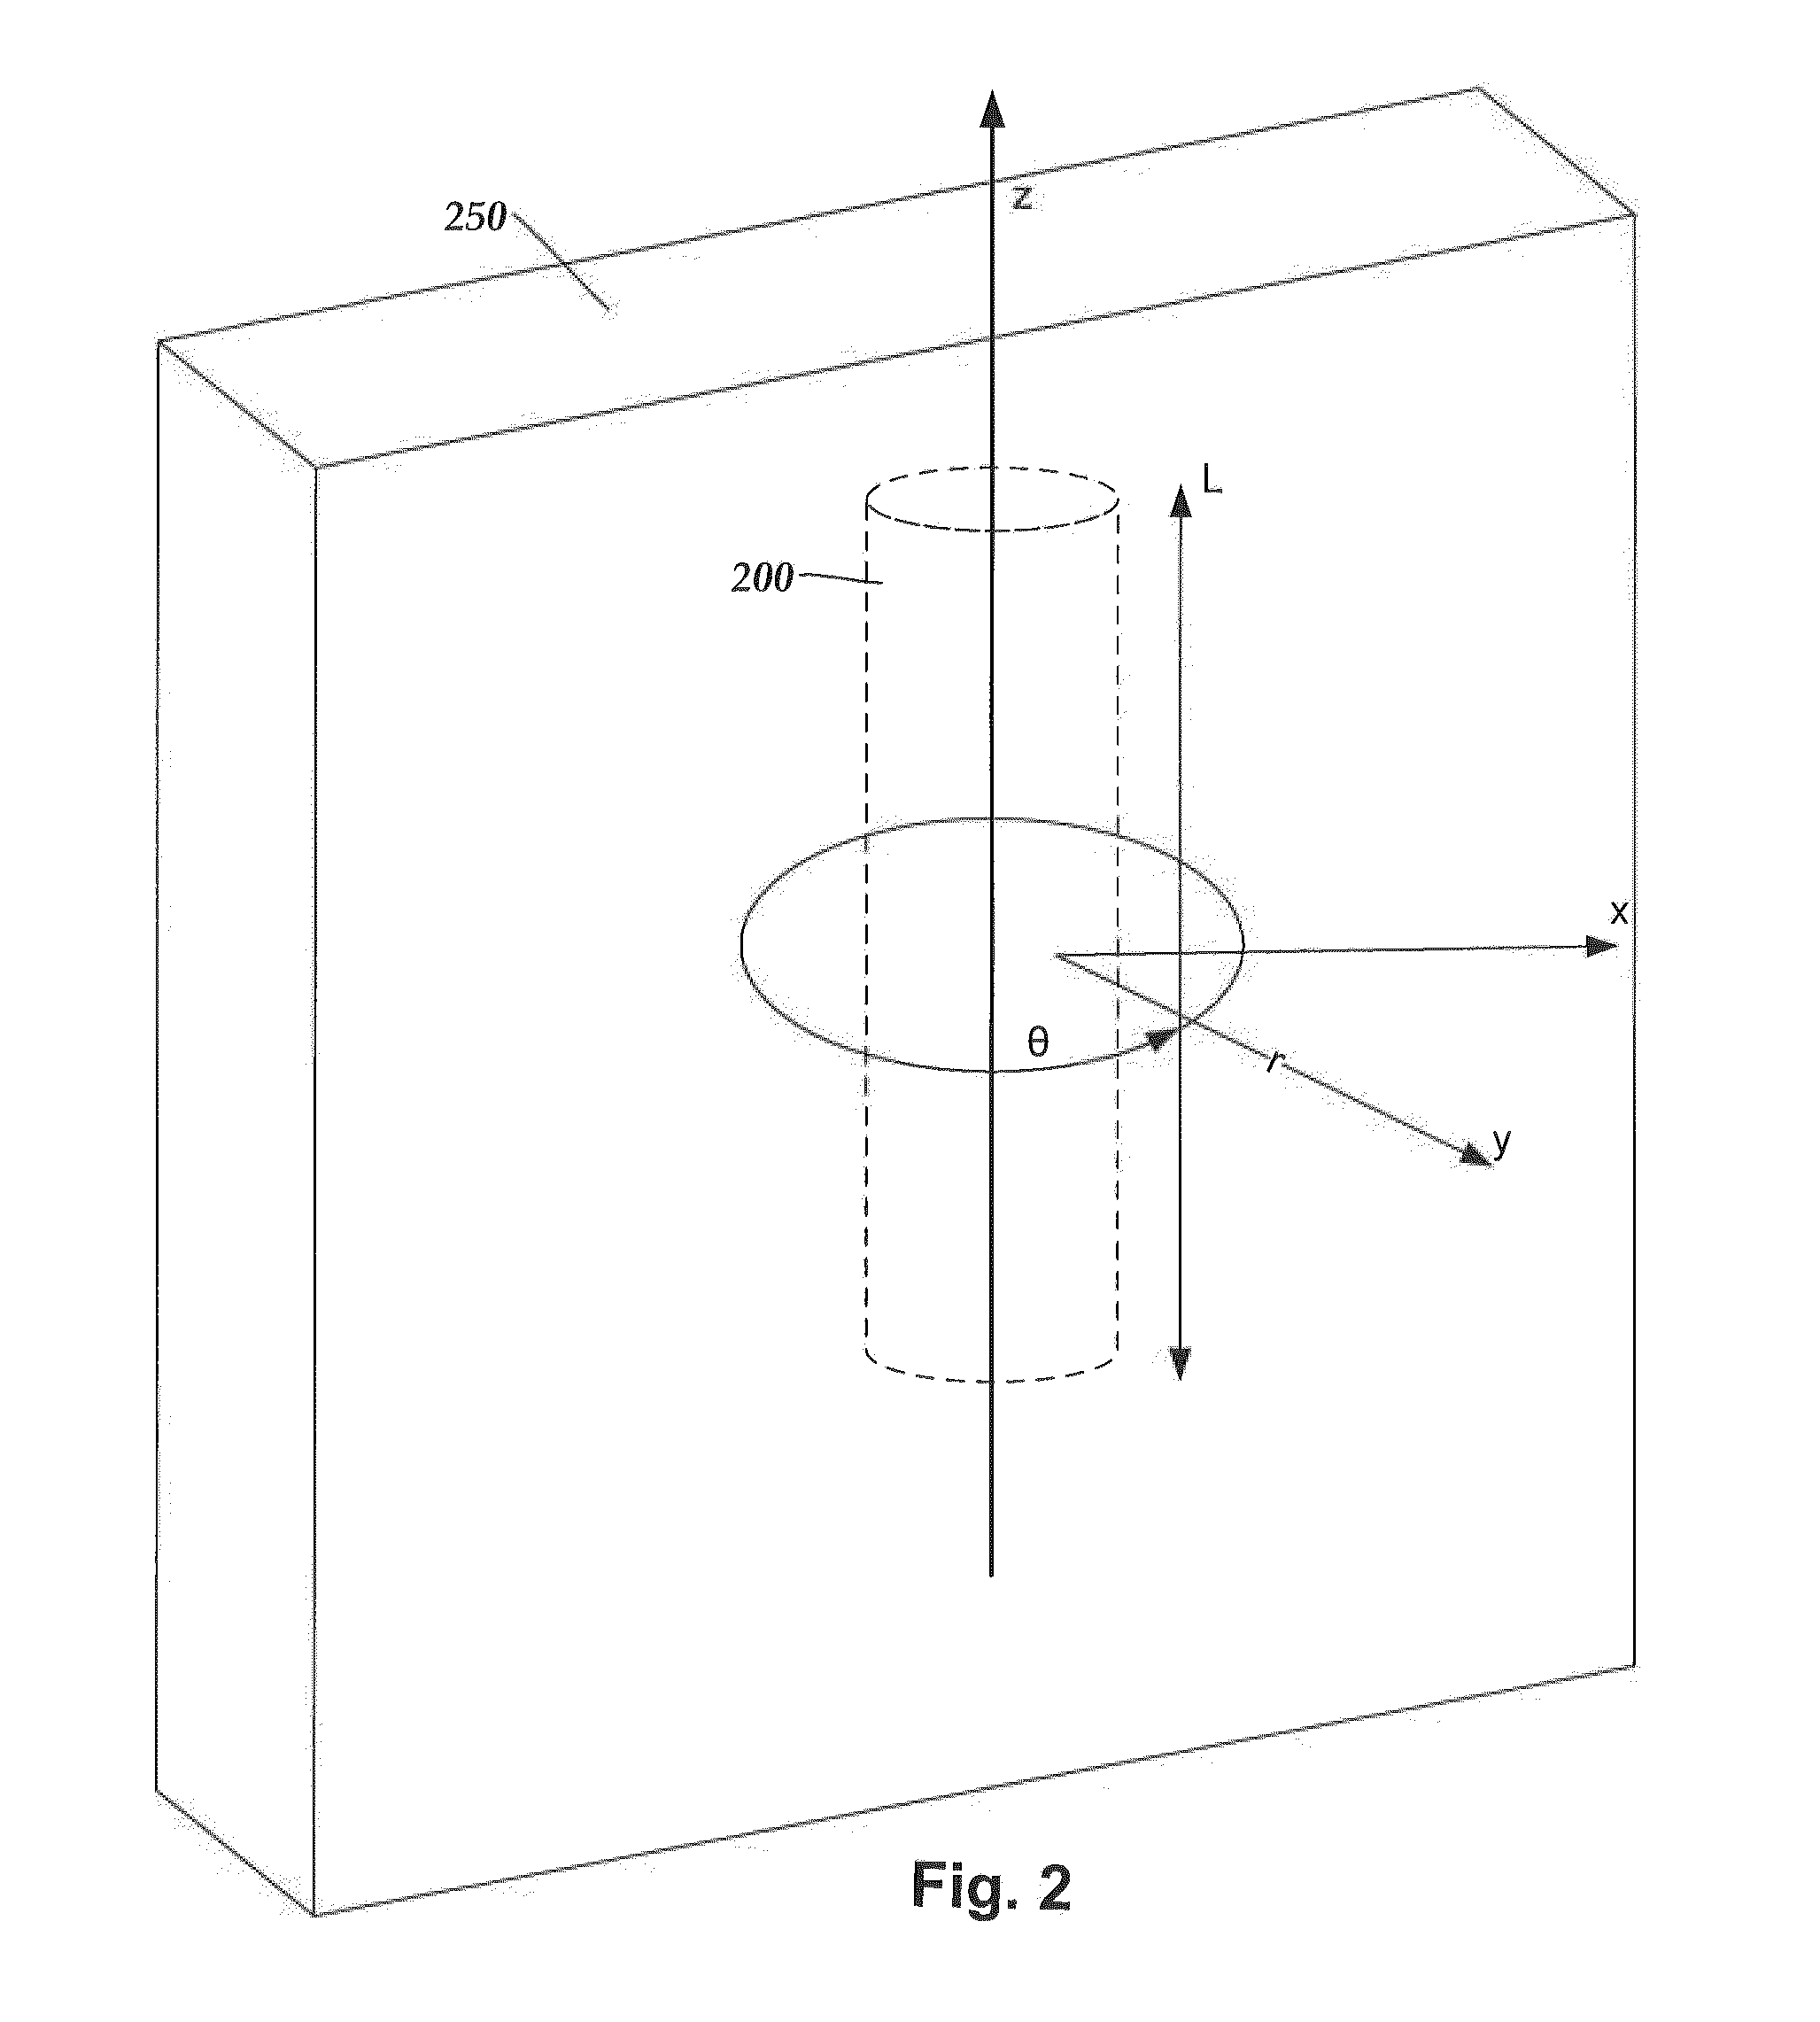 Segmented electrode leads formed from pre-electrodes with alignment features and methods of making and using the leads